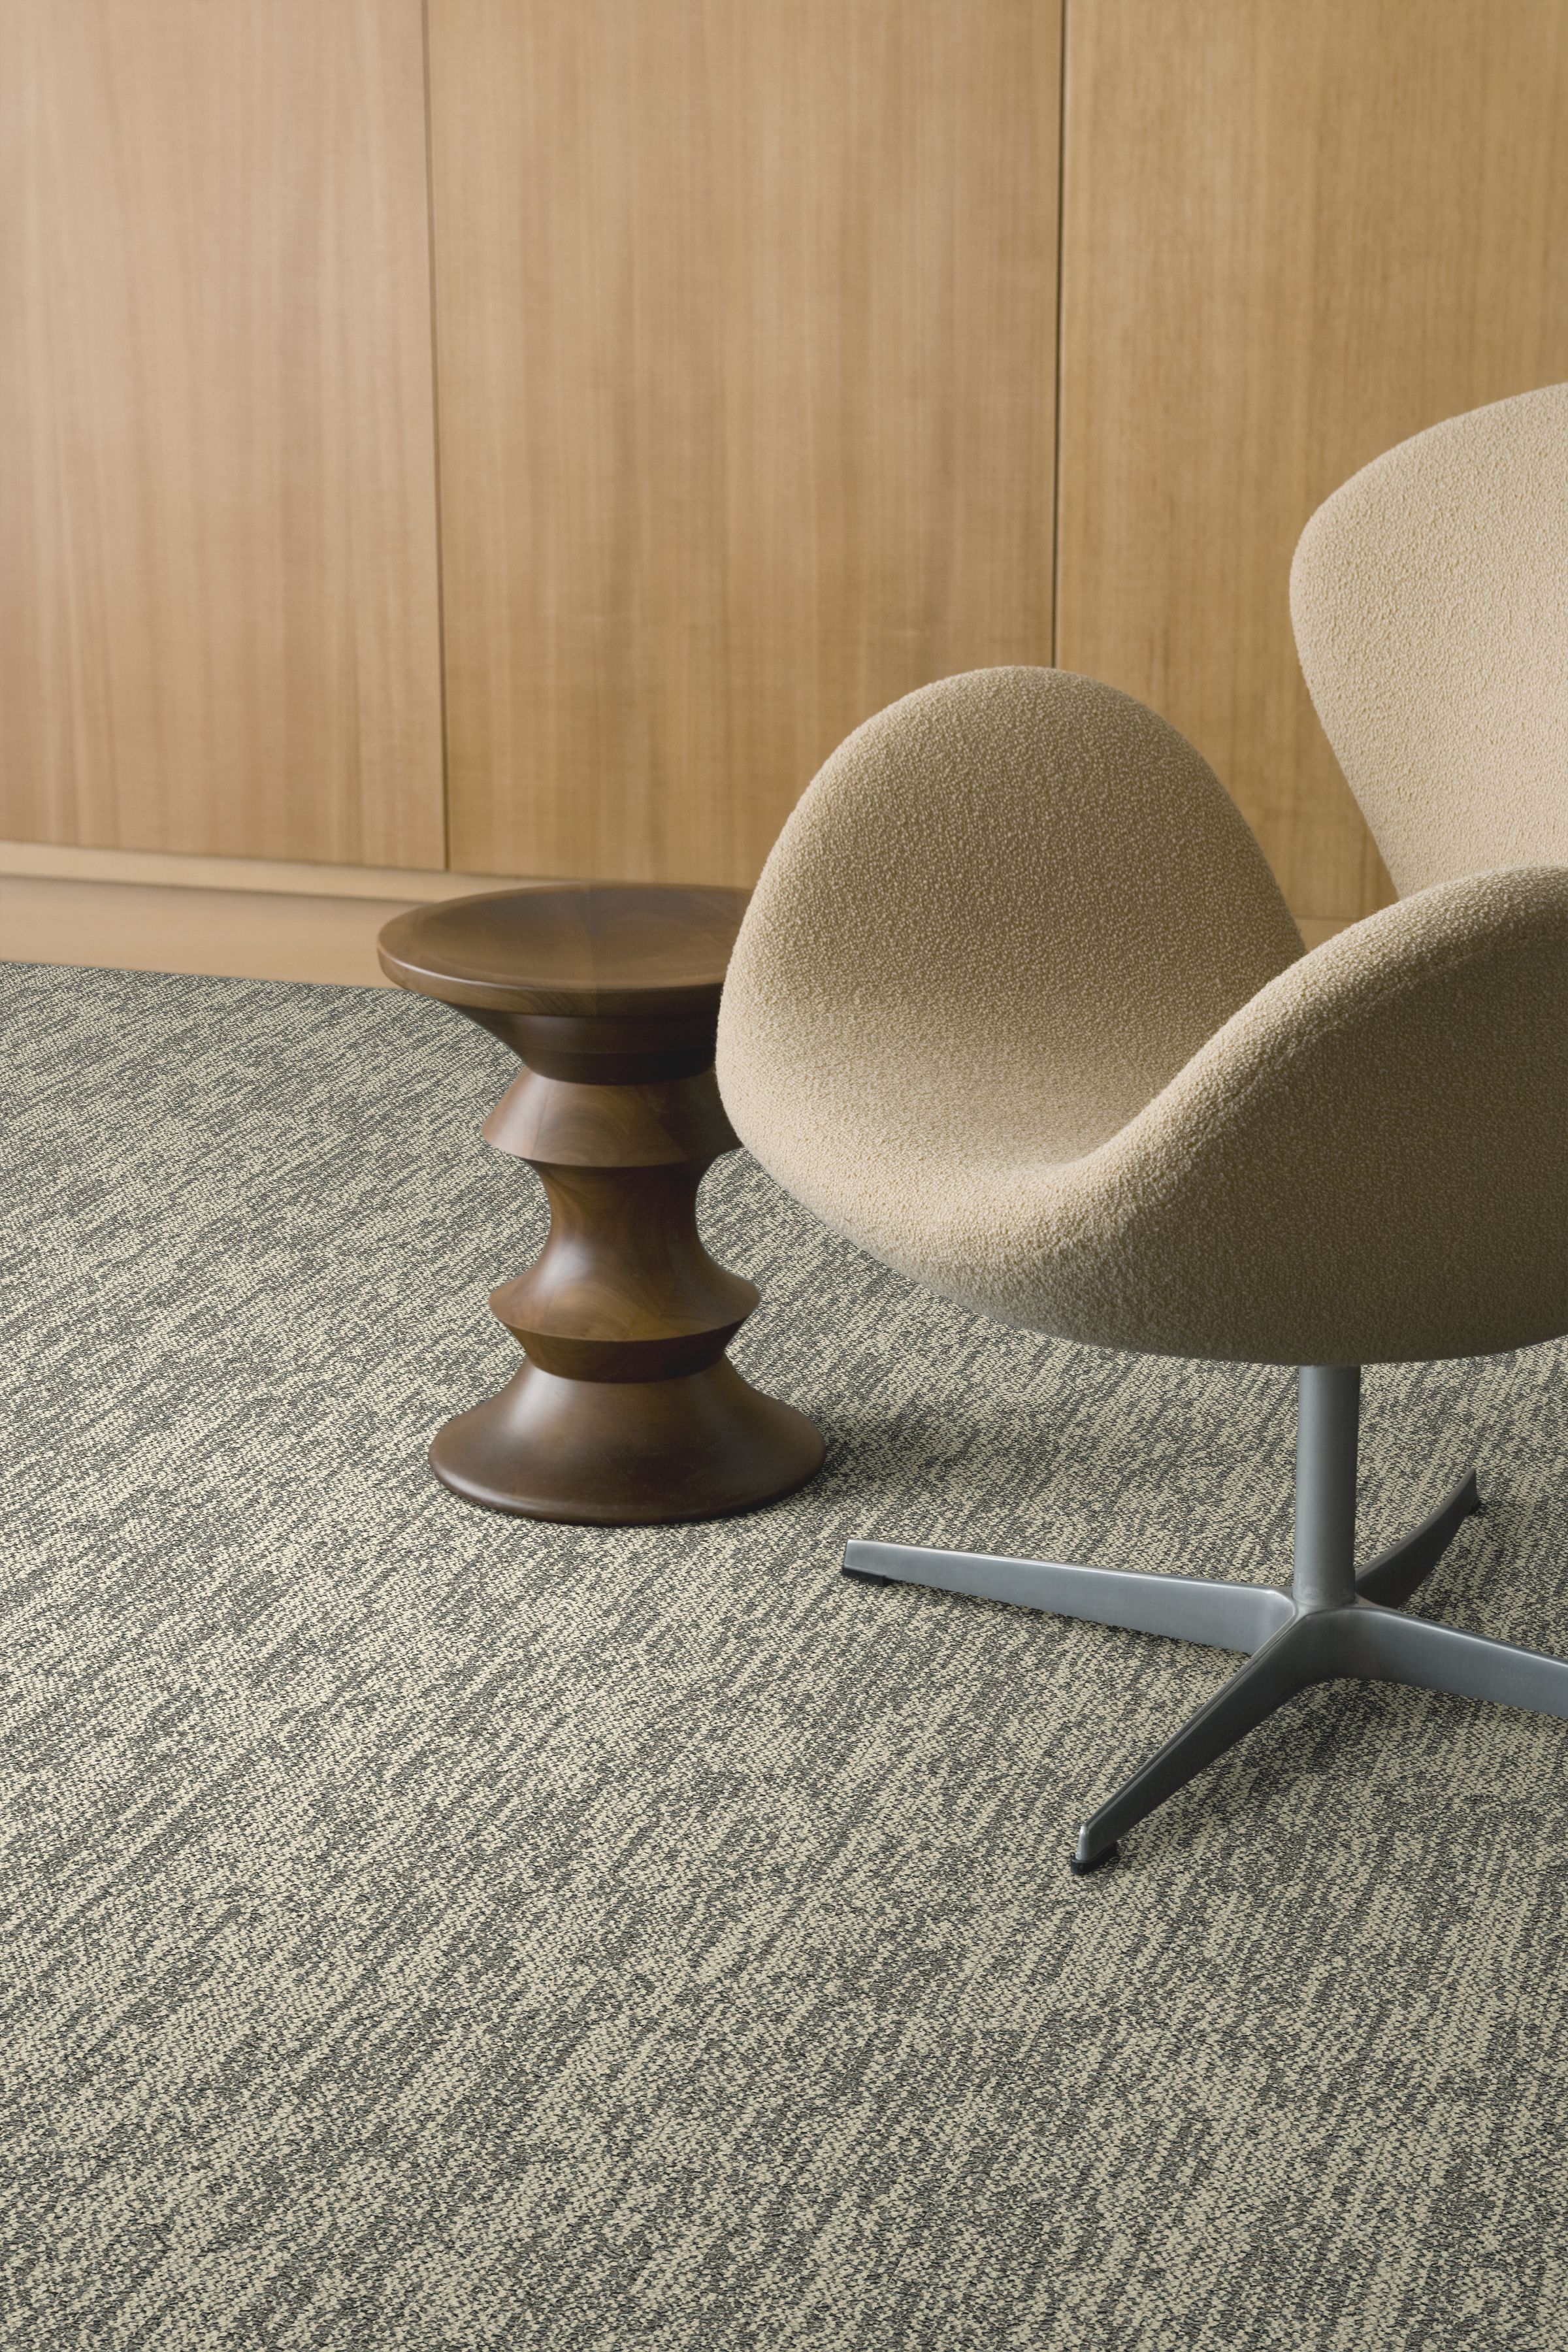 Interface Obligato plank carpet tile with textured fabric chair and small wooden art deco table imagen número 10